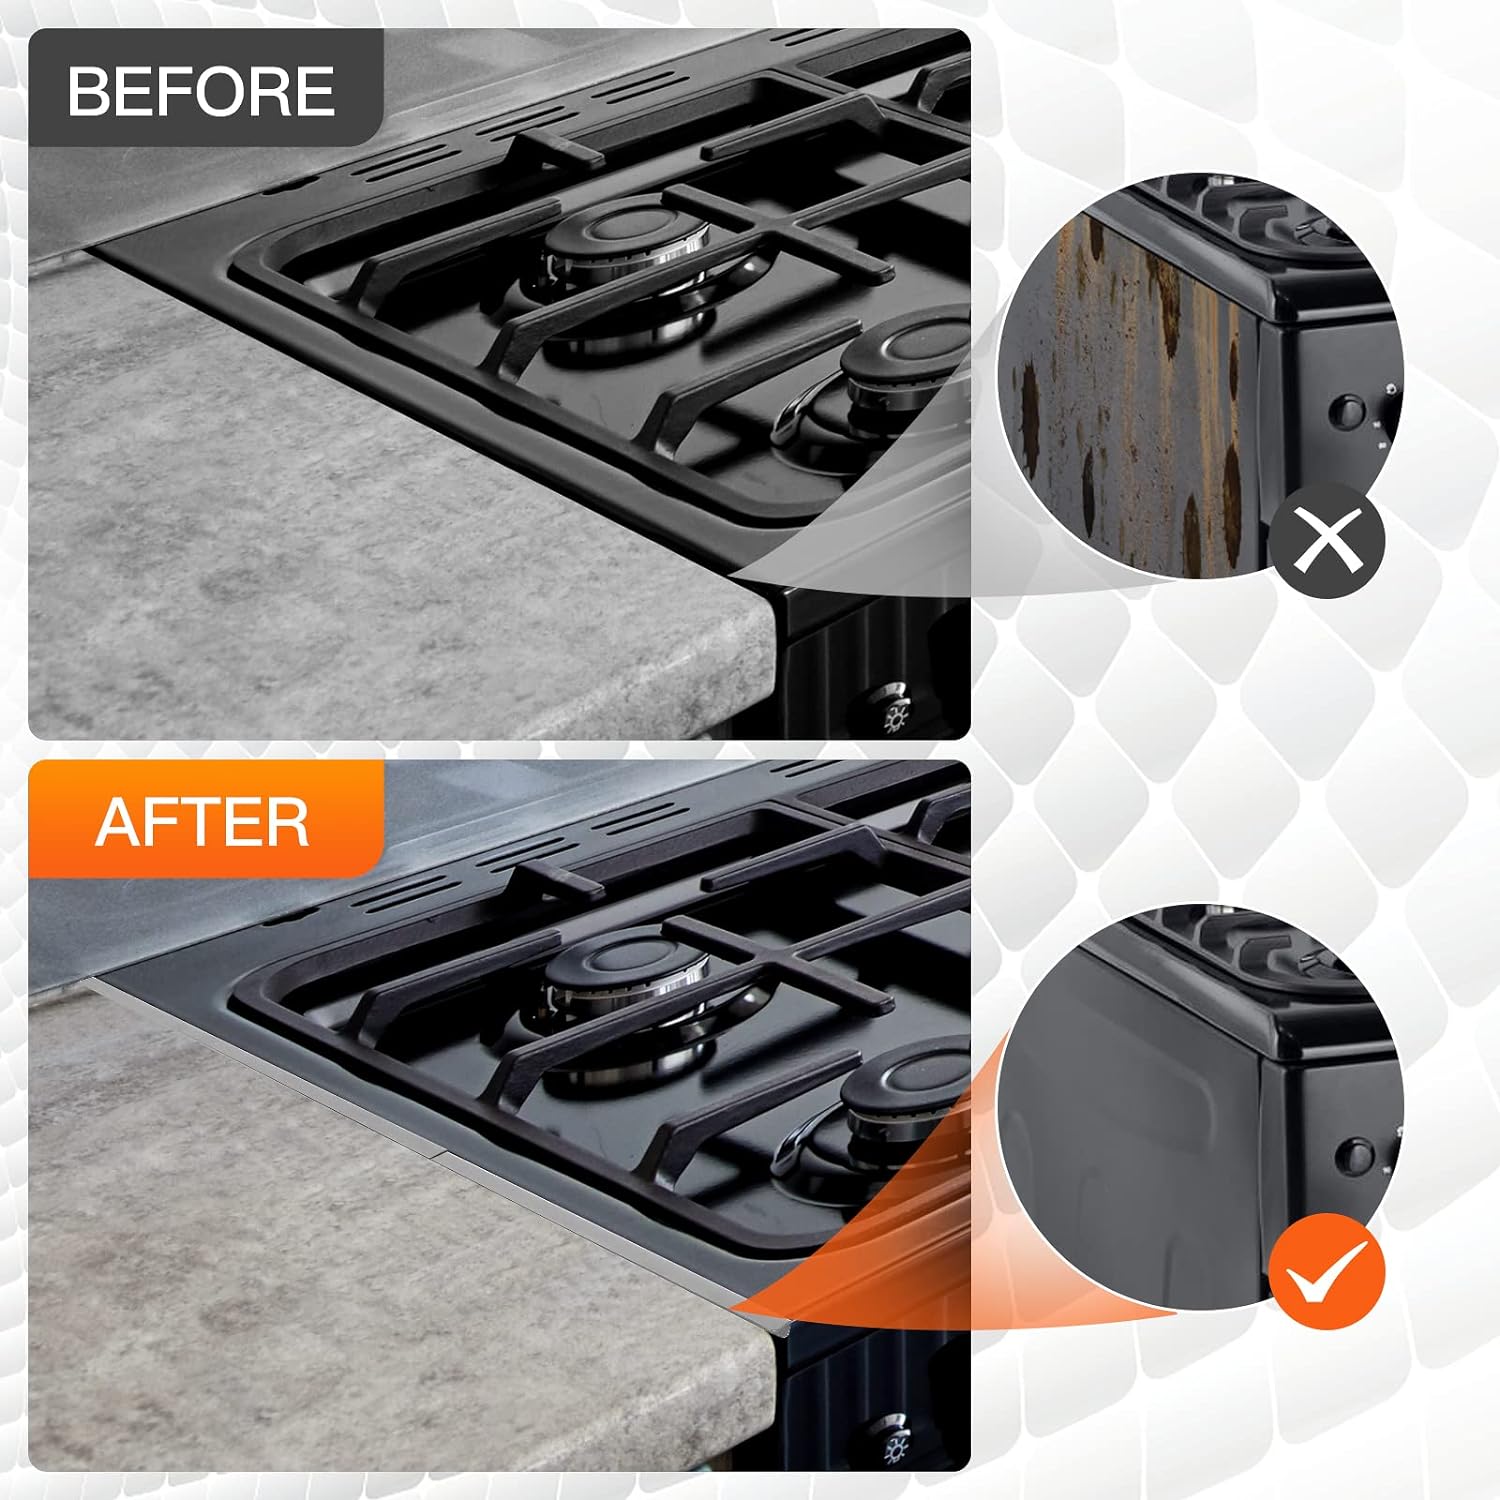 ItsNio US2-FXT-SS-Silver01 Stainless Steel Stove Gap Covers,Stove Gap Filler,  Range Trim Kit, Stove Gap Guards, Heat Resistant and Easy to Clean, Easy ret